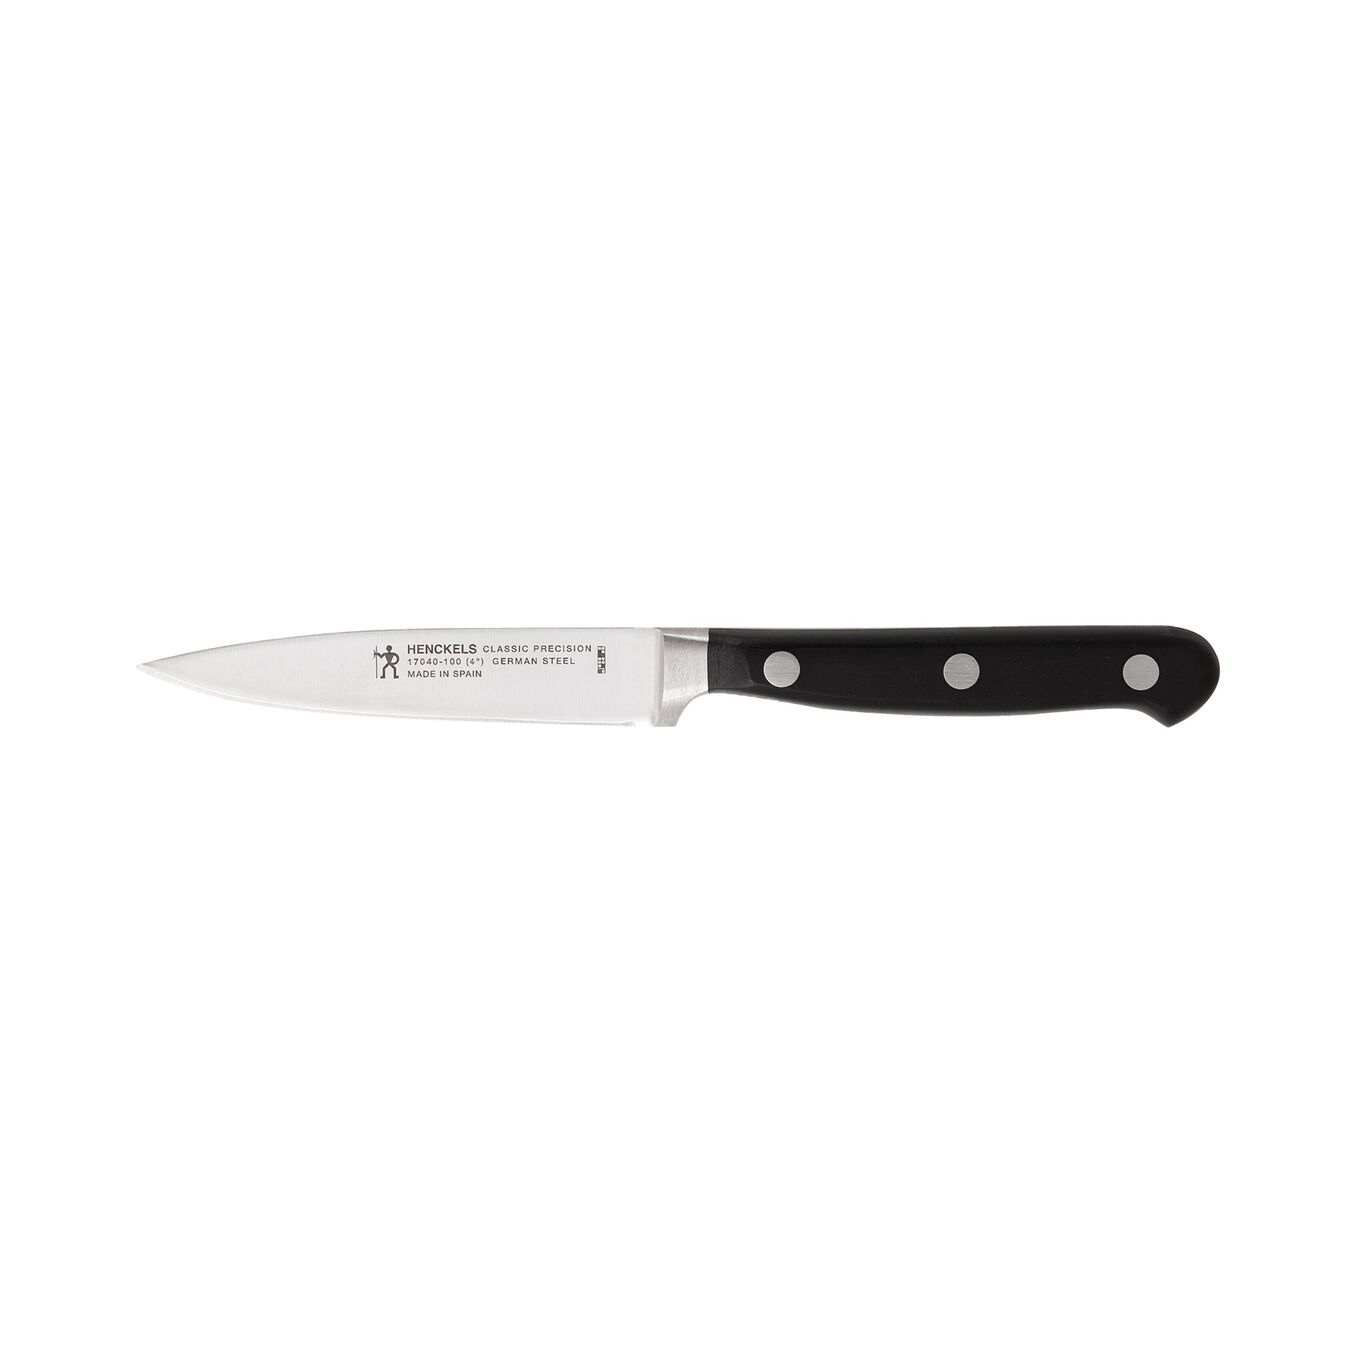 4-inch, Paring knife,,large 1